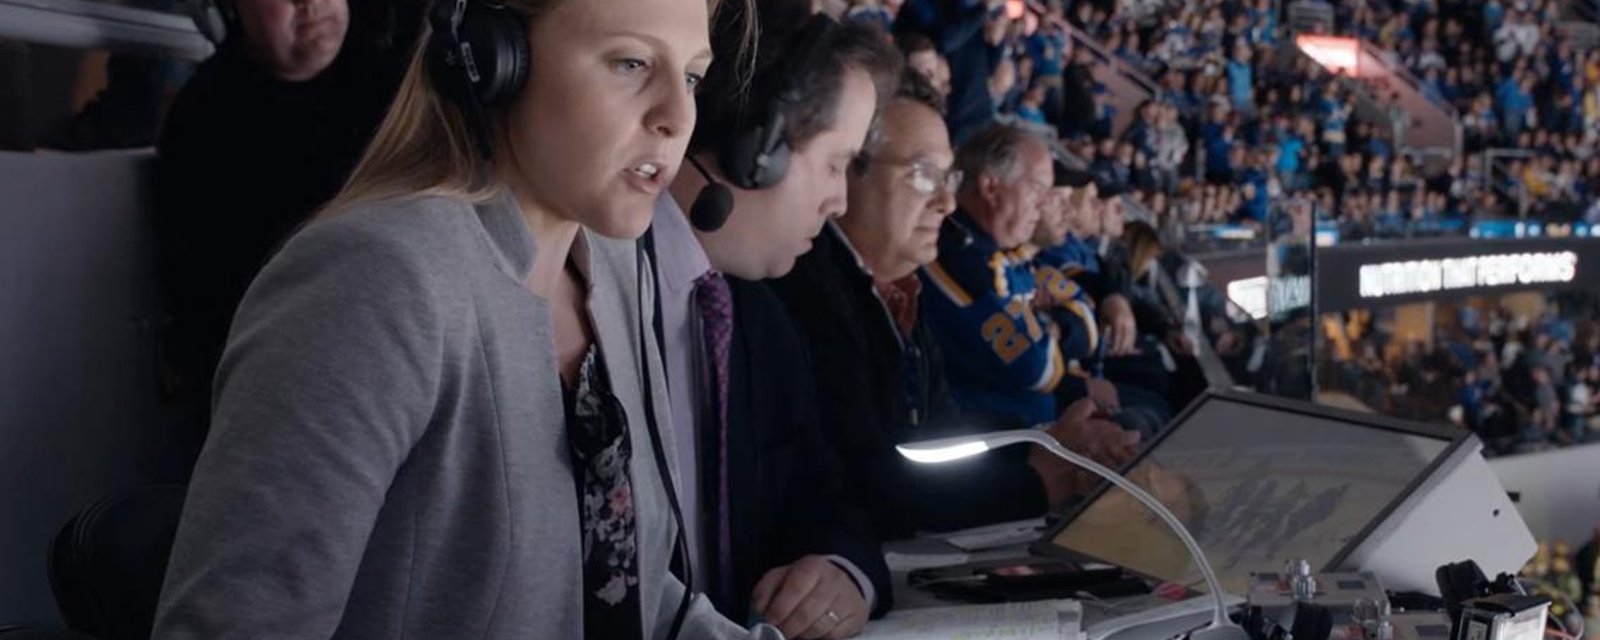 NHL to make history with all-female production and broadcast crew